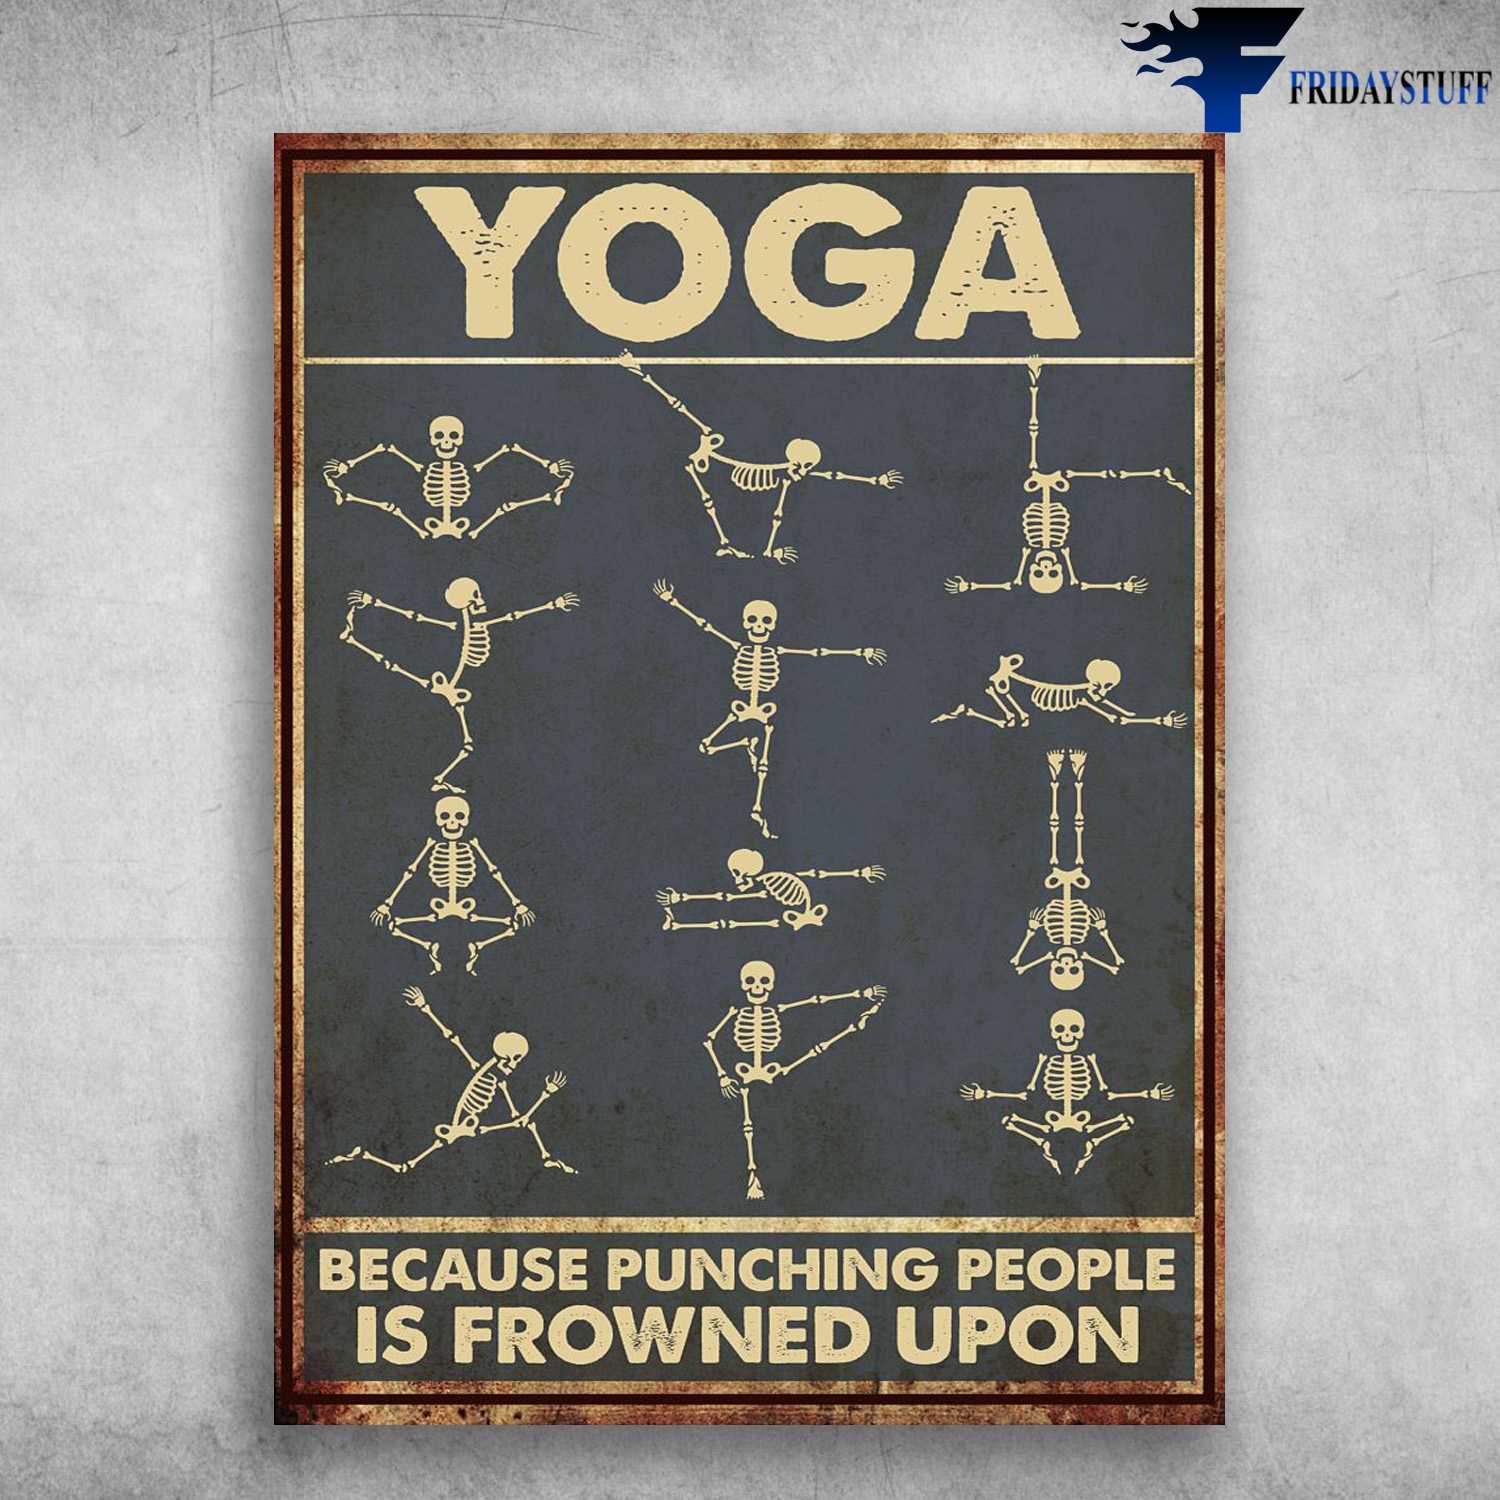 Yoga Poster, Yoga Poses - Because Pinching People, Is Frowned Upon